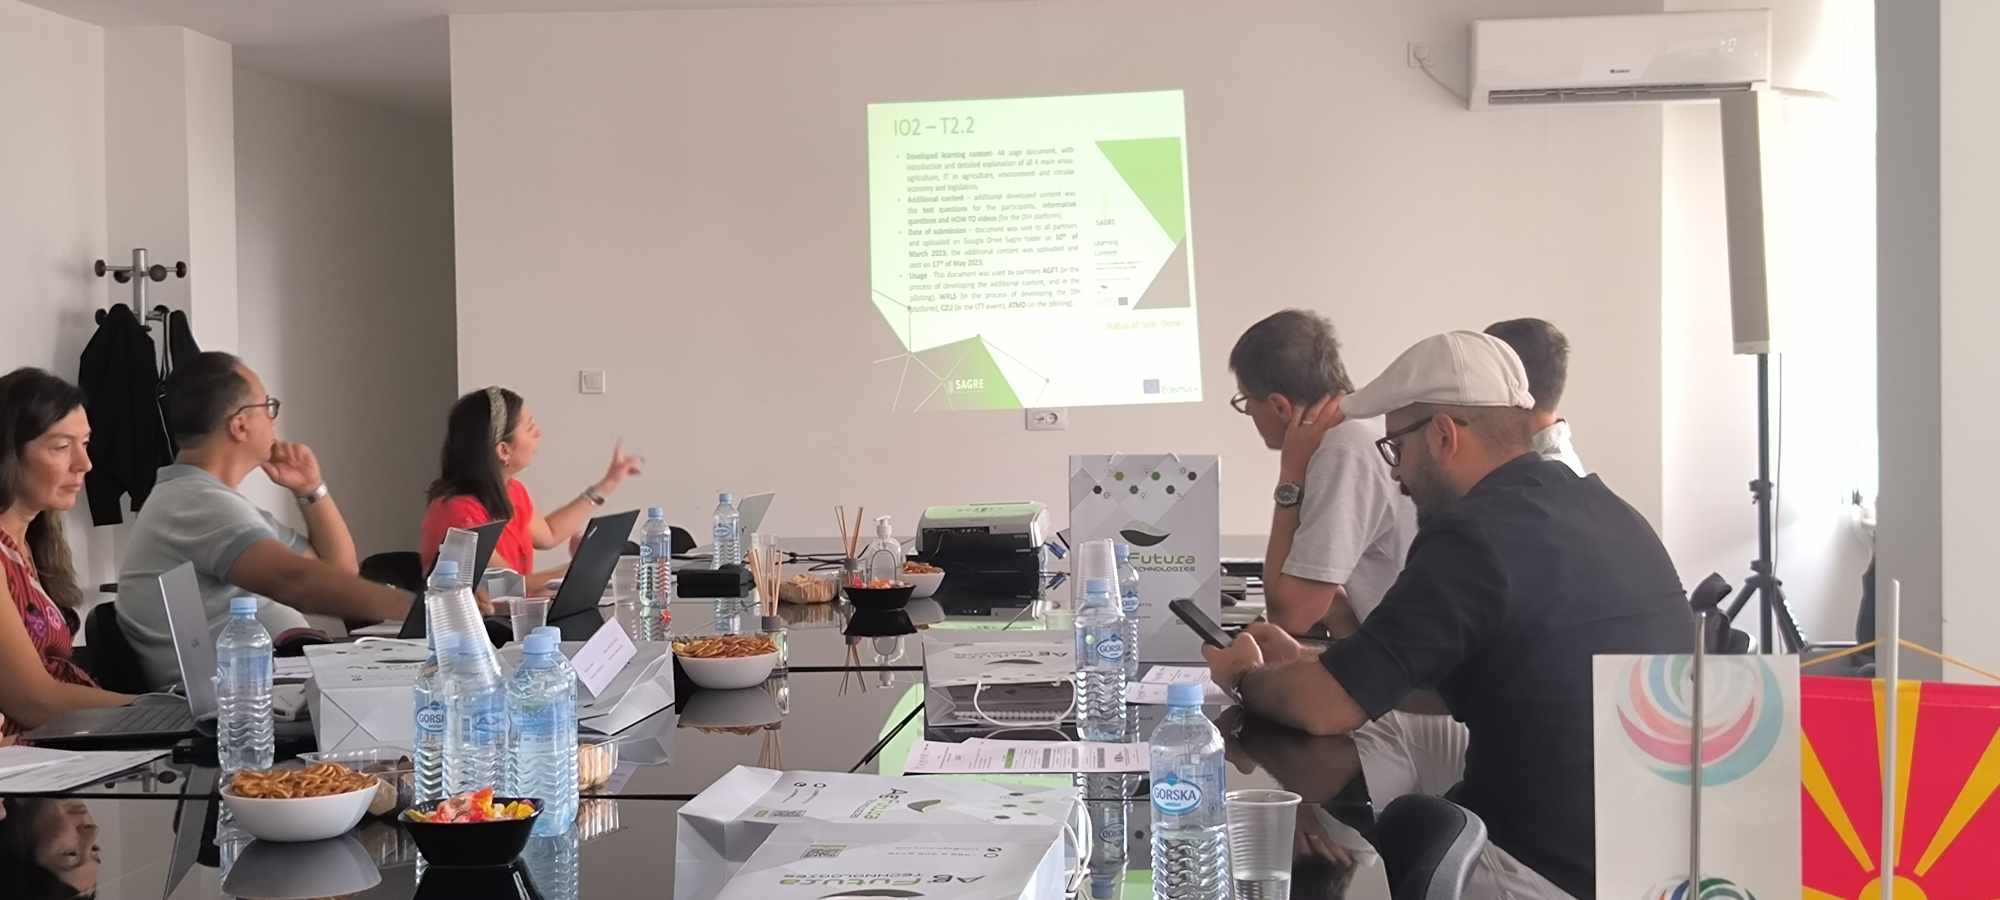 AgFutura Technologies hosted the SAGRE project meeting in Skopje